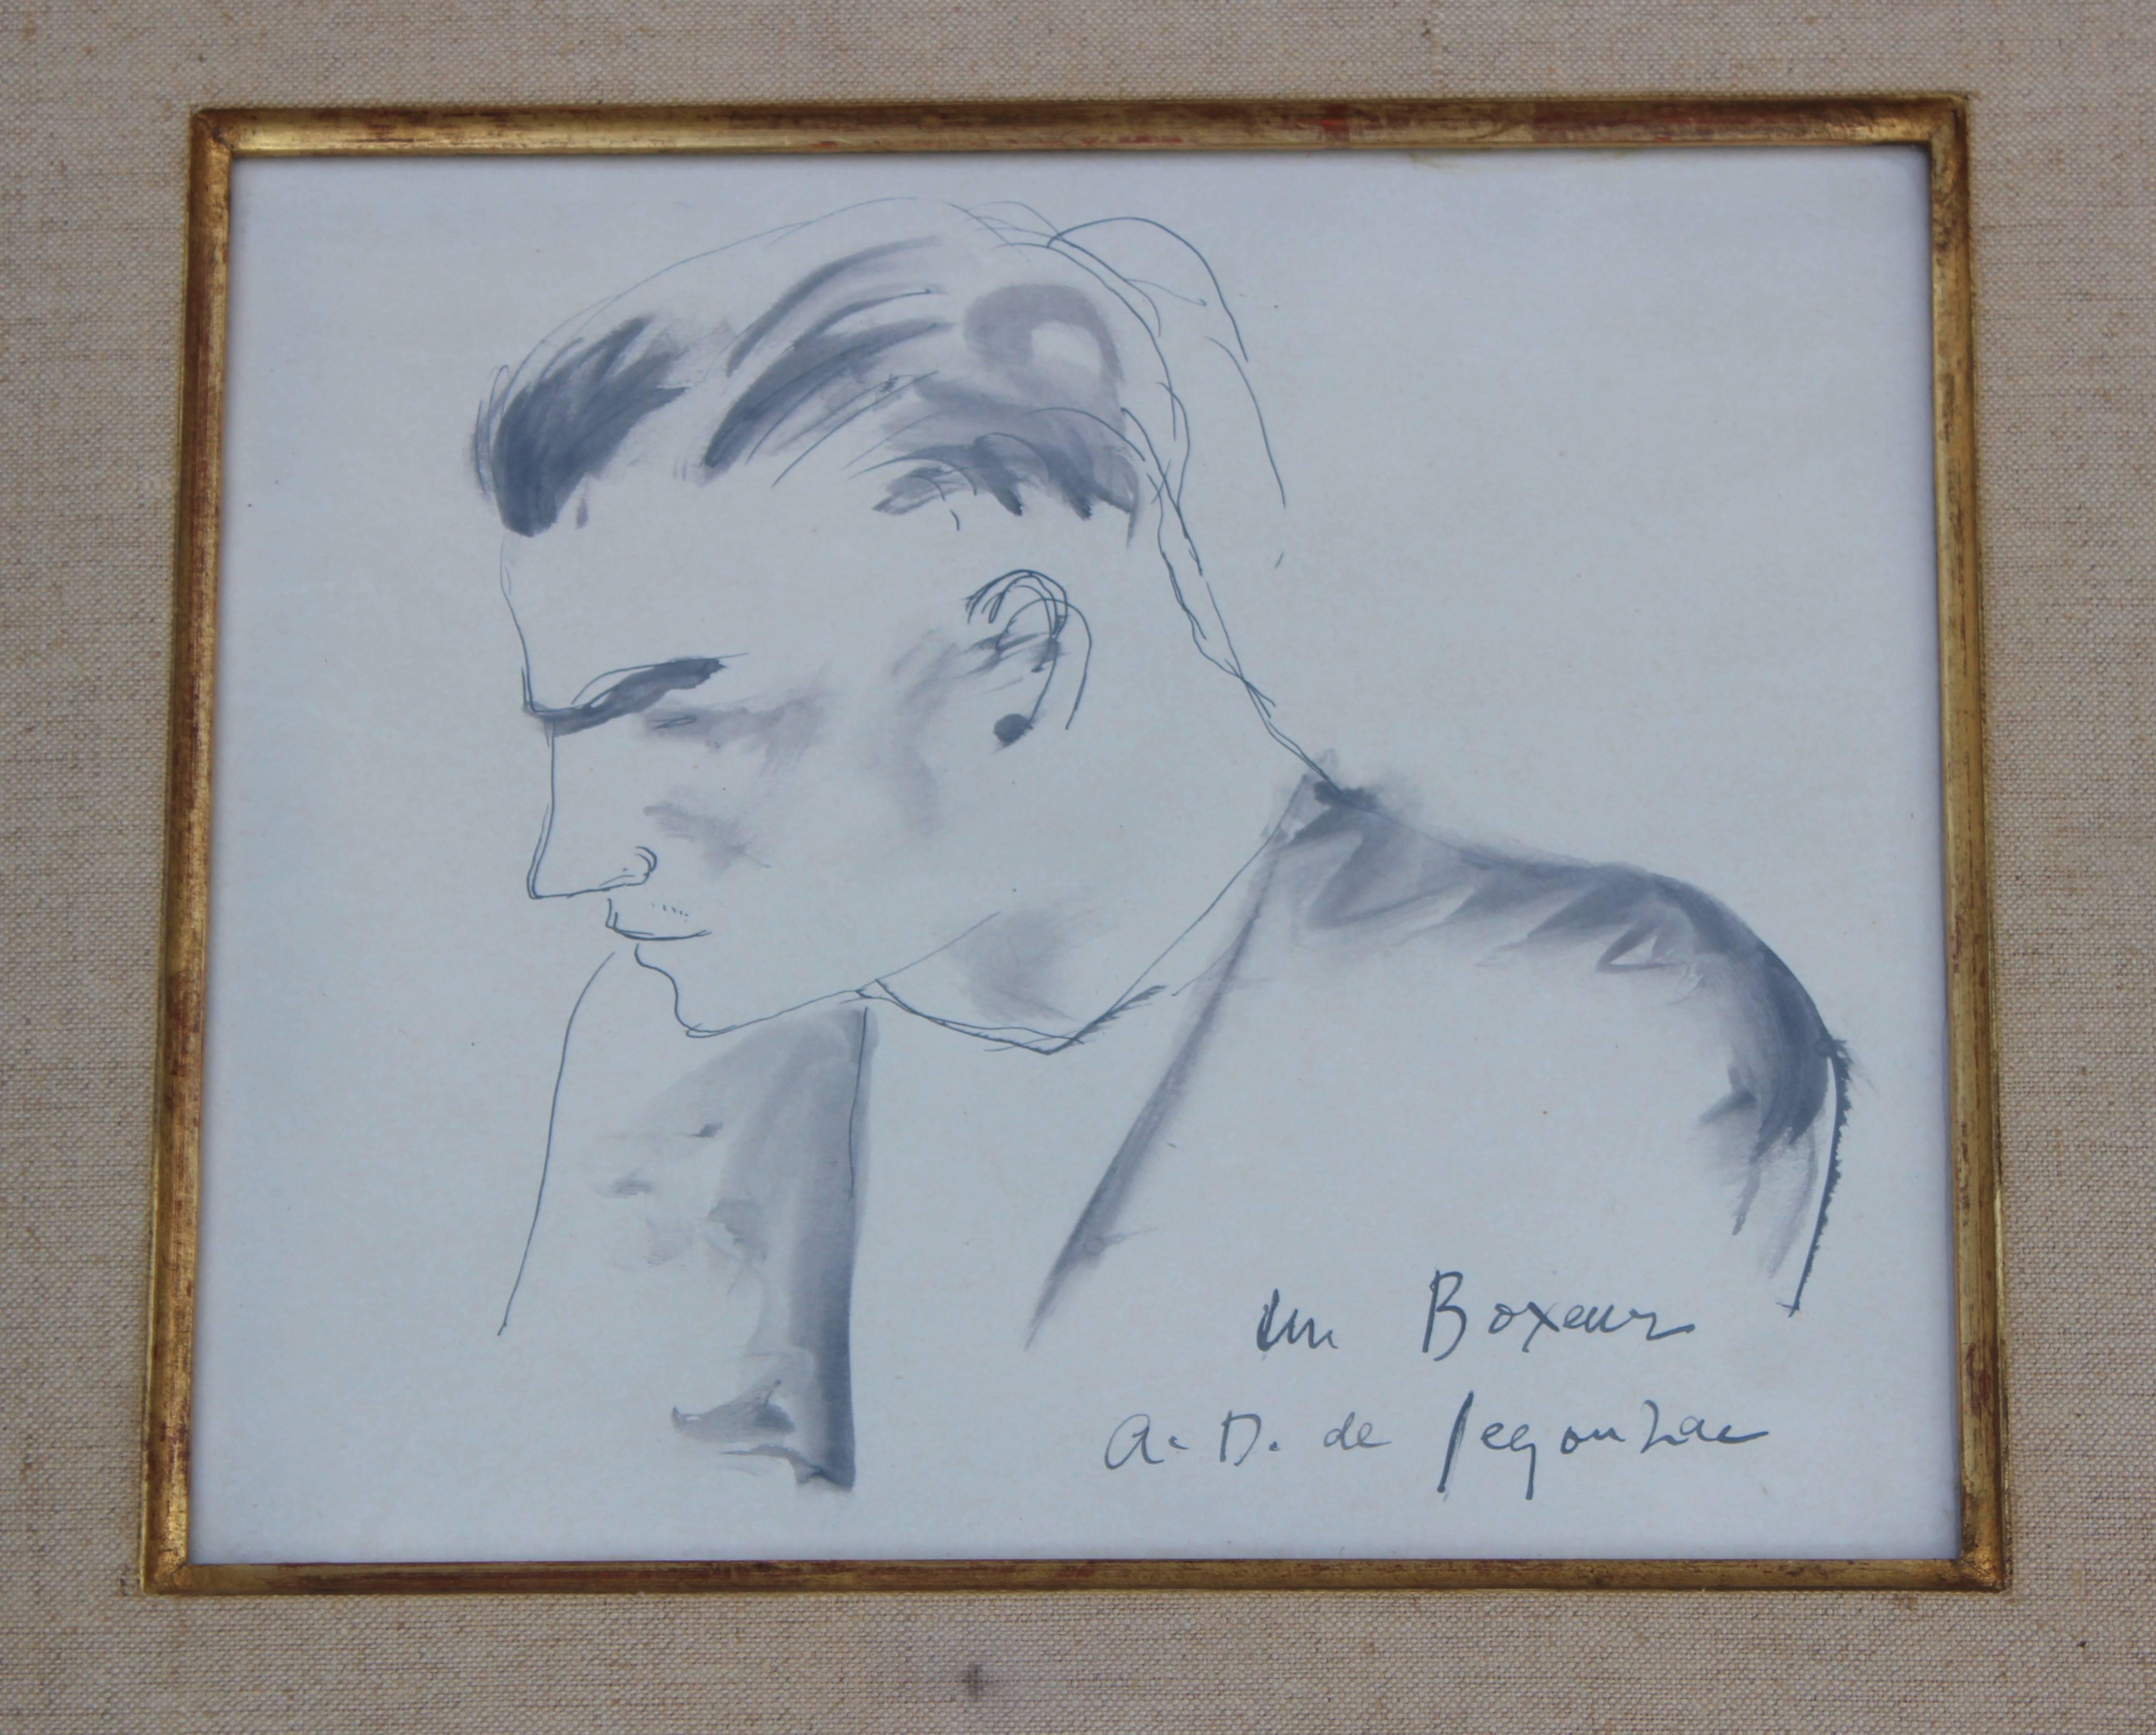 Boxeur drawing/ watercolor by André Dunoyer de Segonzac.

Signed and dated May 10, 1968. Authenticated by artist on a photograph of the piece of art.

Artwork size: 7